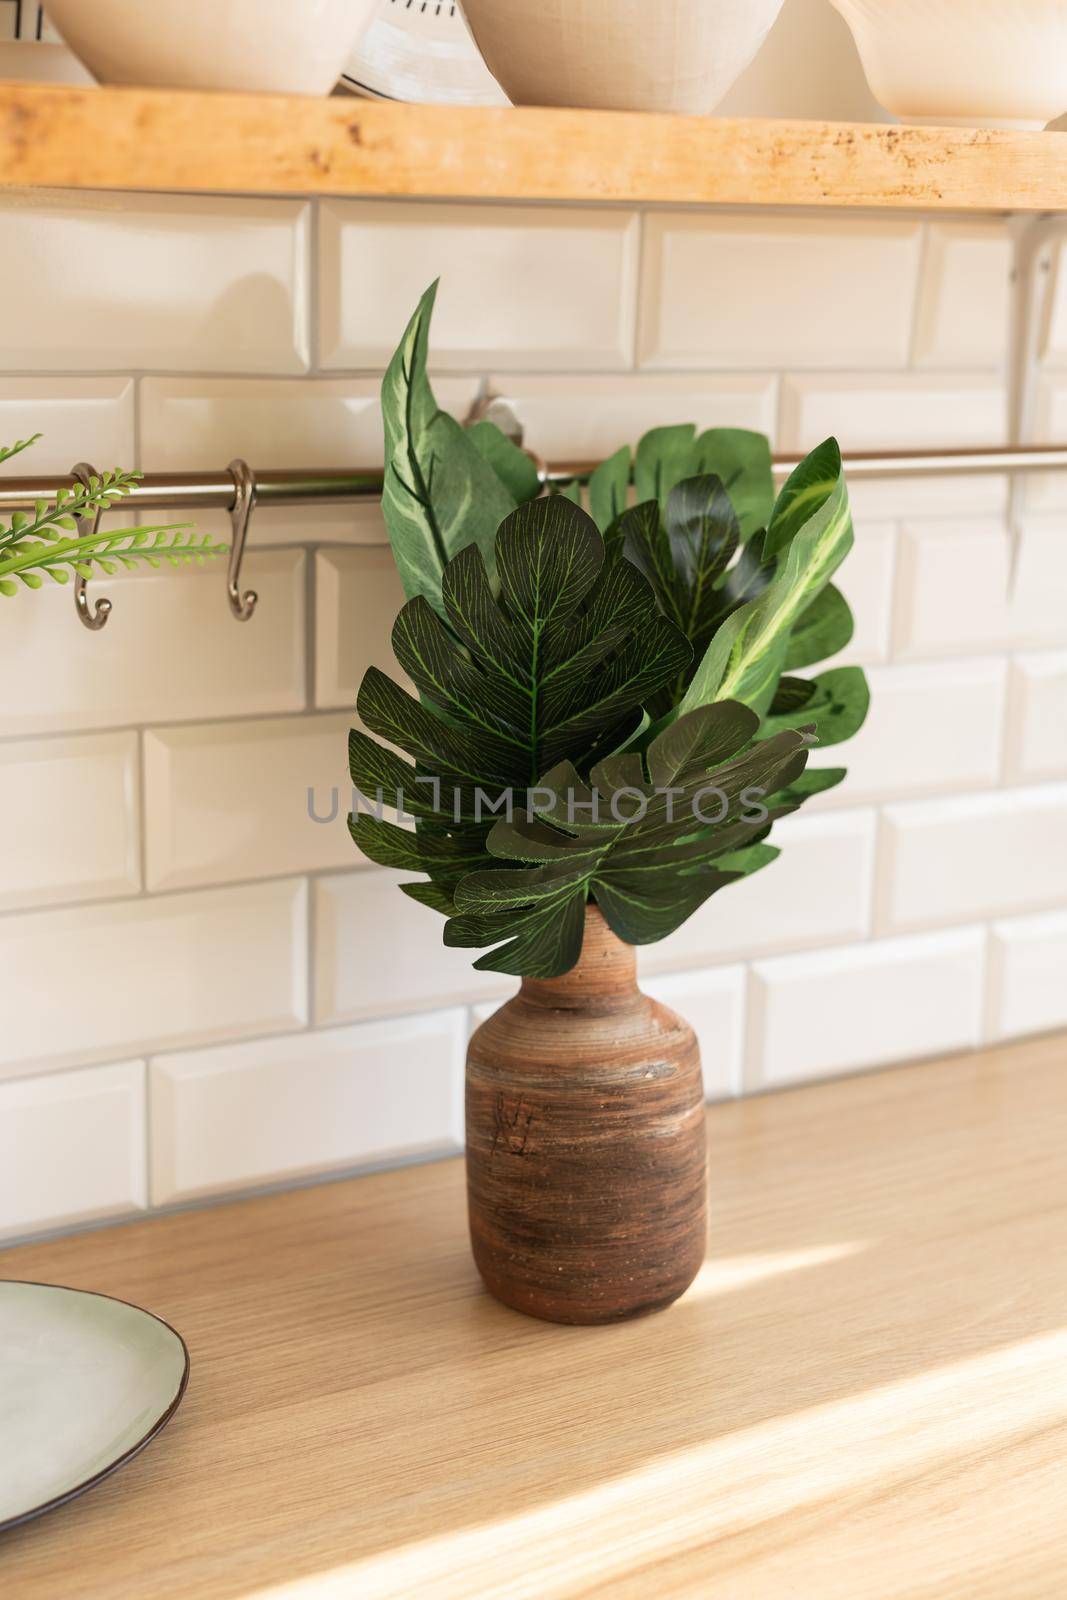 Artificial monstera leaves on a vase in scandinavian kitchen style background by Satura86